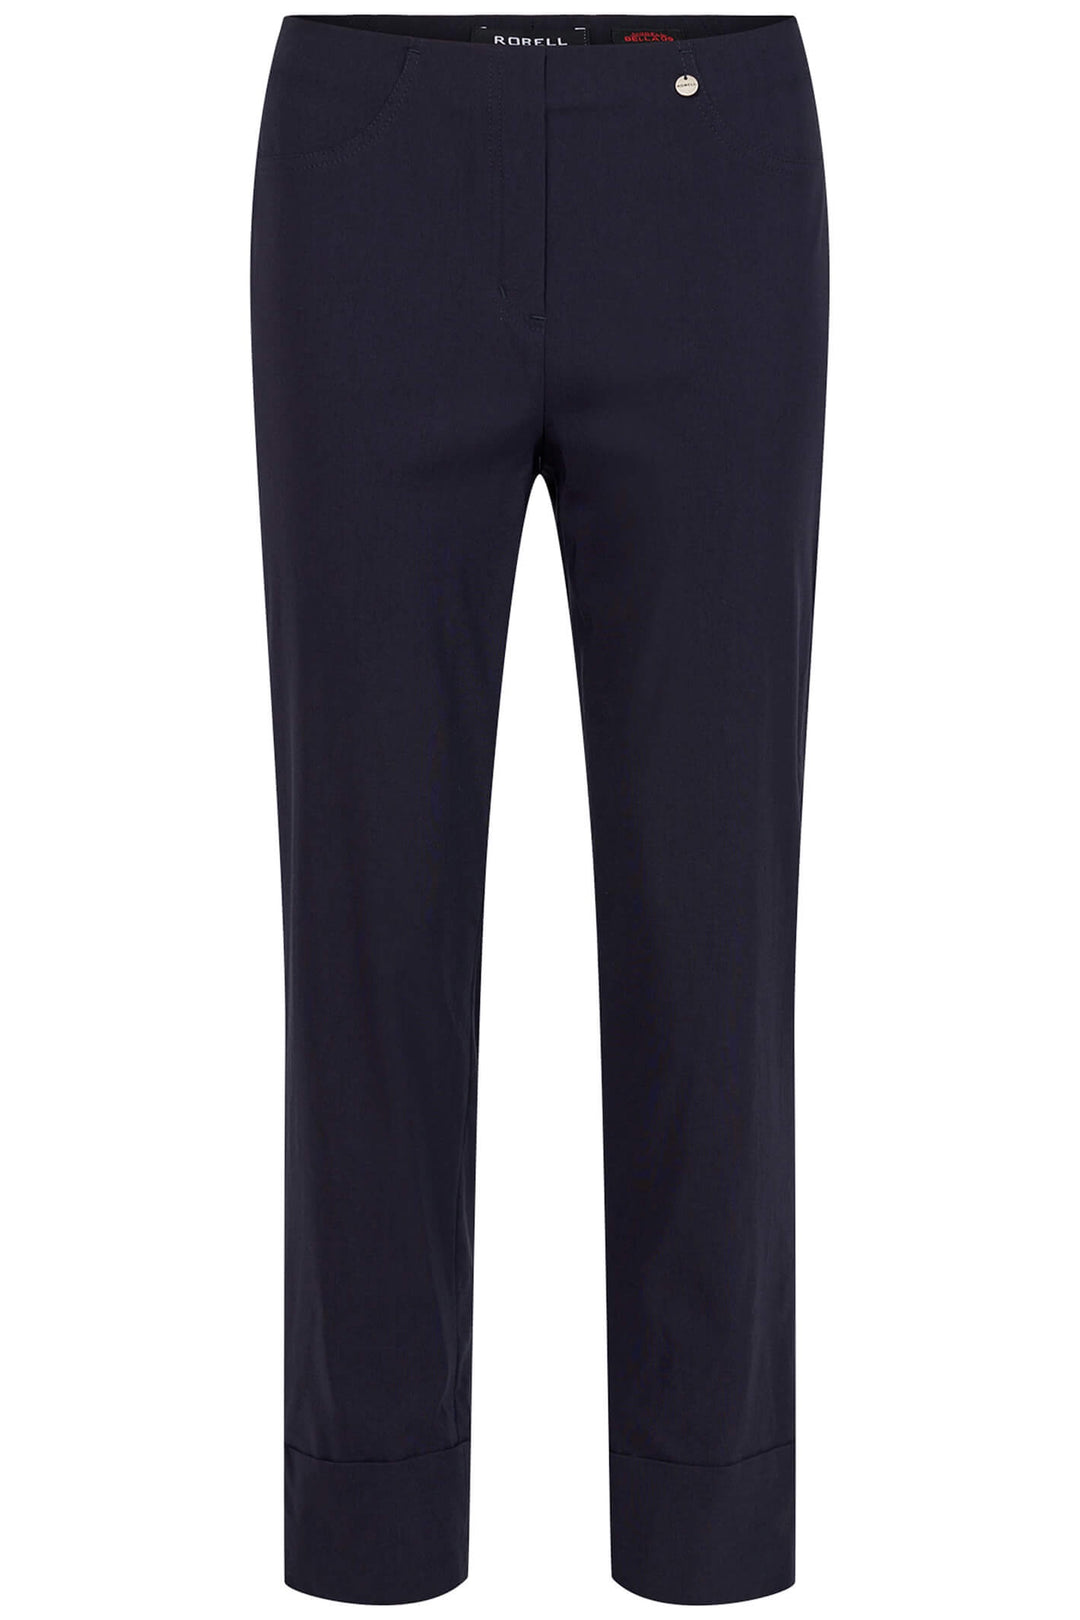 Robell 51568-5499-69 Bella 09 Navy Ankle Grazer Trousers - Dotique